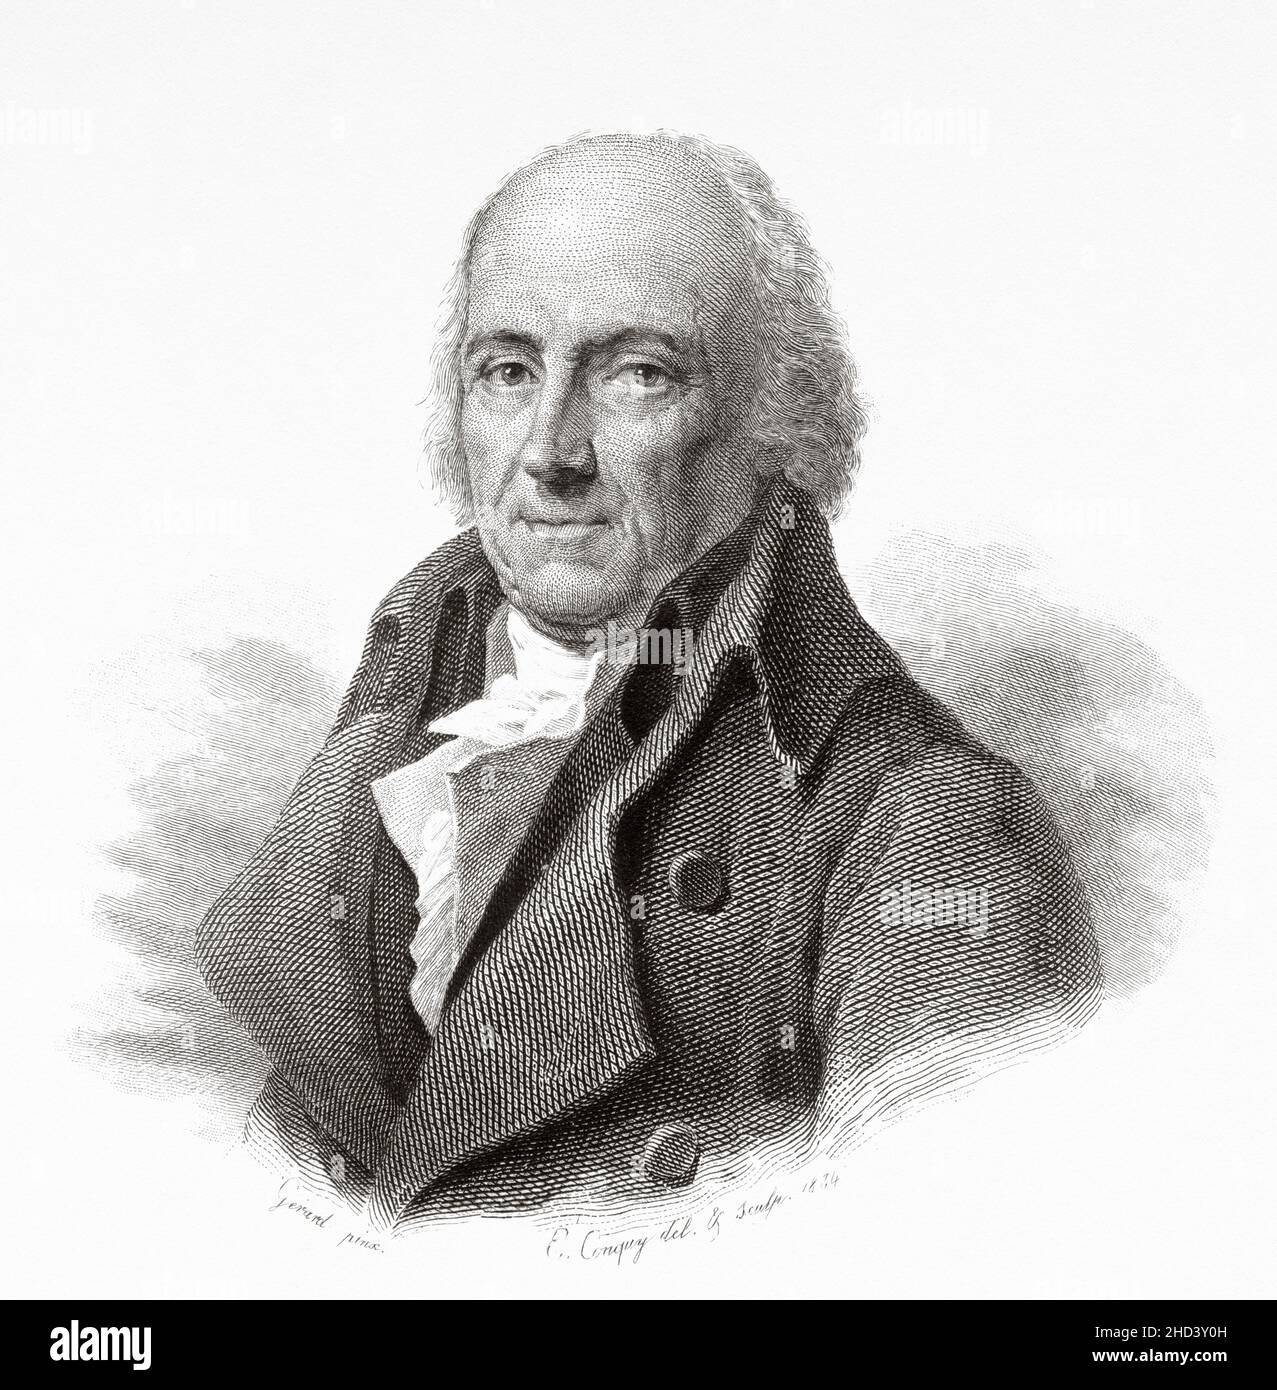 Jean Darcet. Jean d'Arcet (1724-1801) was a French chemist, and director of the porcelain works at Sèvres. He was one of the first to manufacture porcelain in France. Europe. Old 19th century engraved illustration from Portraits et histoire des hommes utile by Societe Montyon et Franklin 1837 Stock Photo